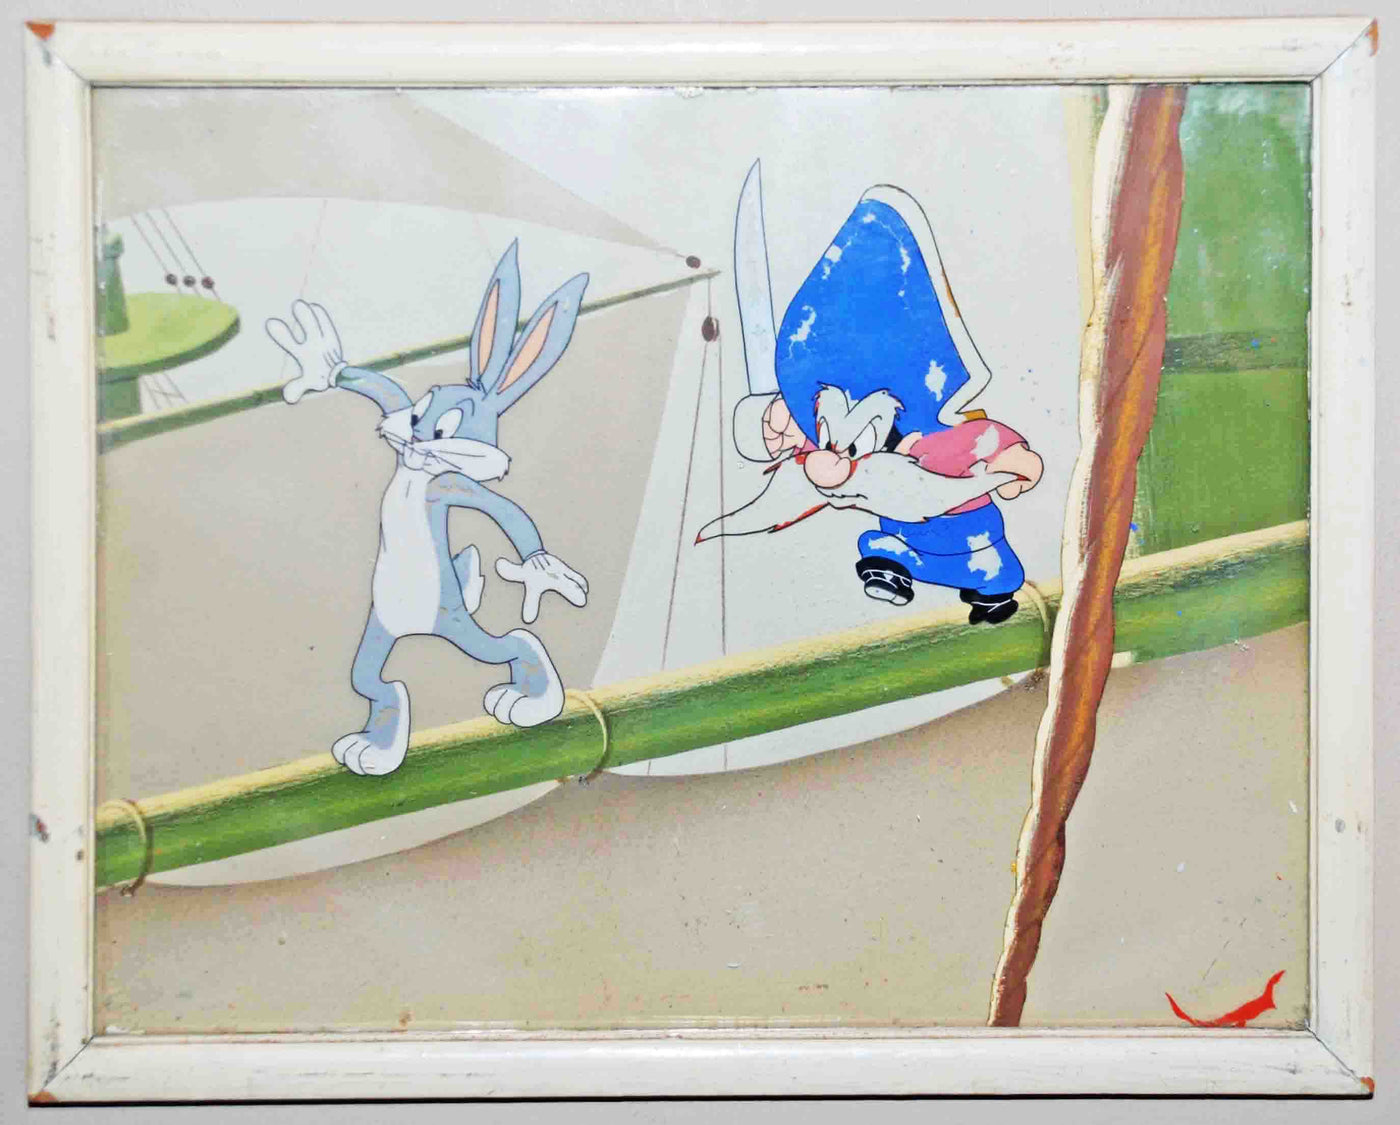 Original Warner Brothers Production Cel Featuring Bugs Bunny and Yosemite Sam